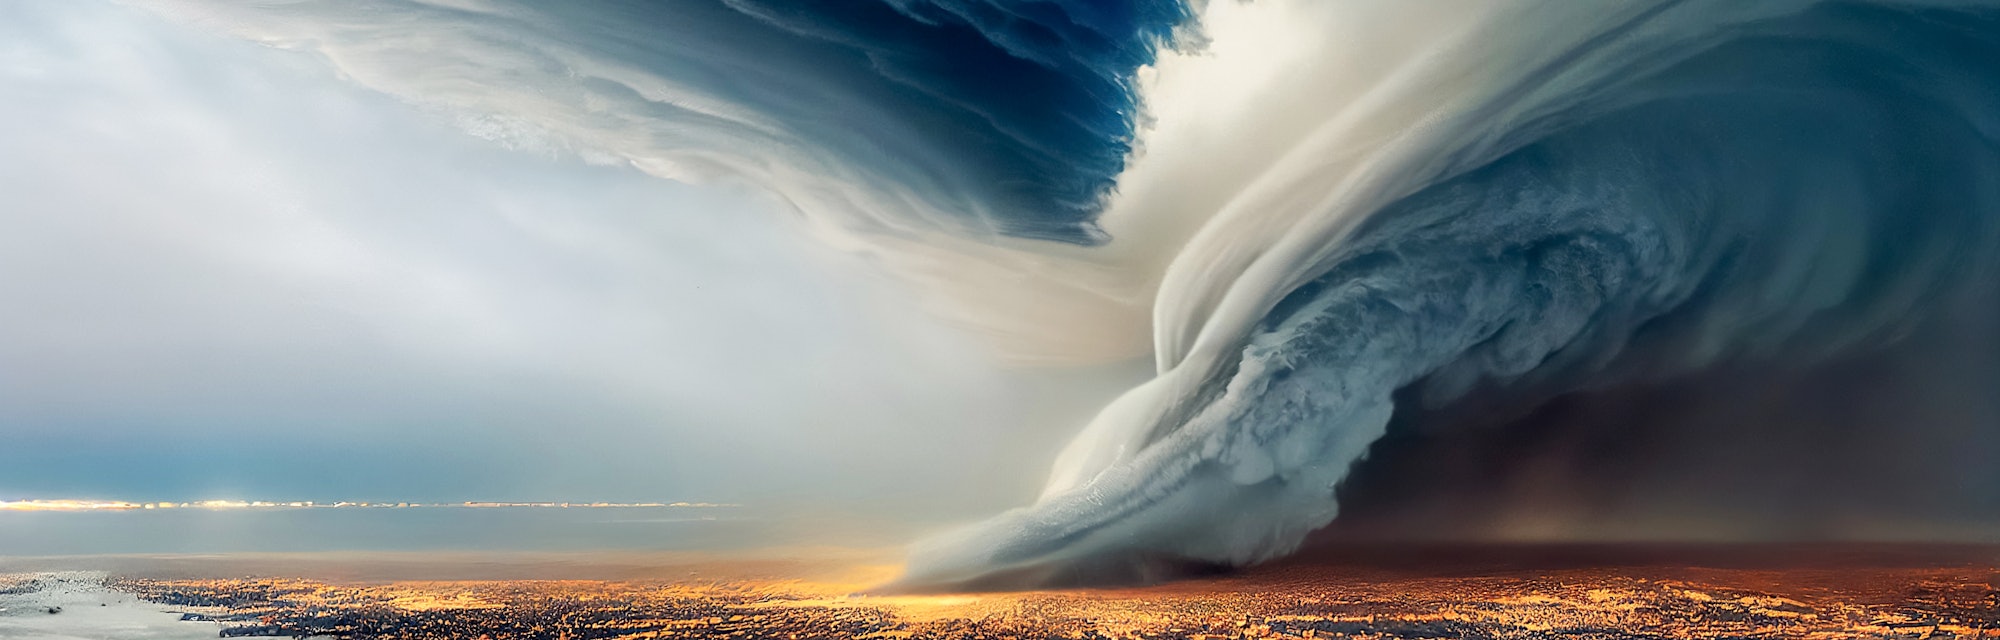 Huge tornado over the city, Storm over the Earth. A view of a large tornado that destroyed an entire...